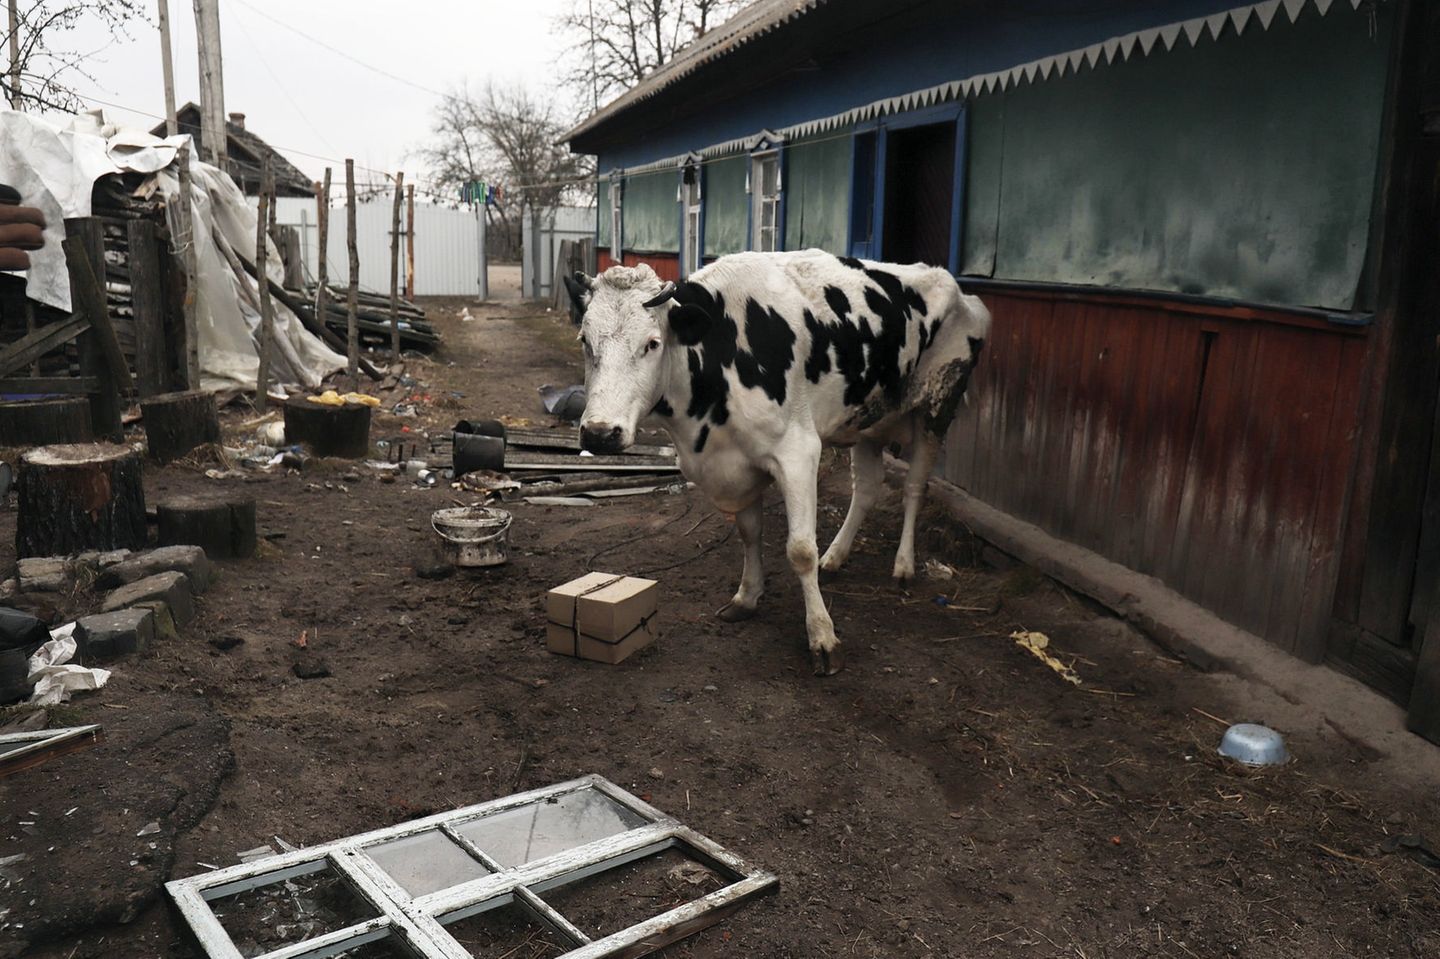 Teterev near Kyiv: the village was completely evacuated after the invasion of Russian troops.  This cow is left